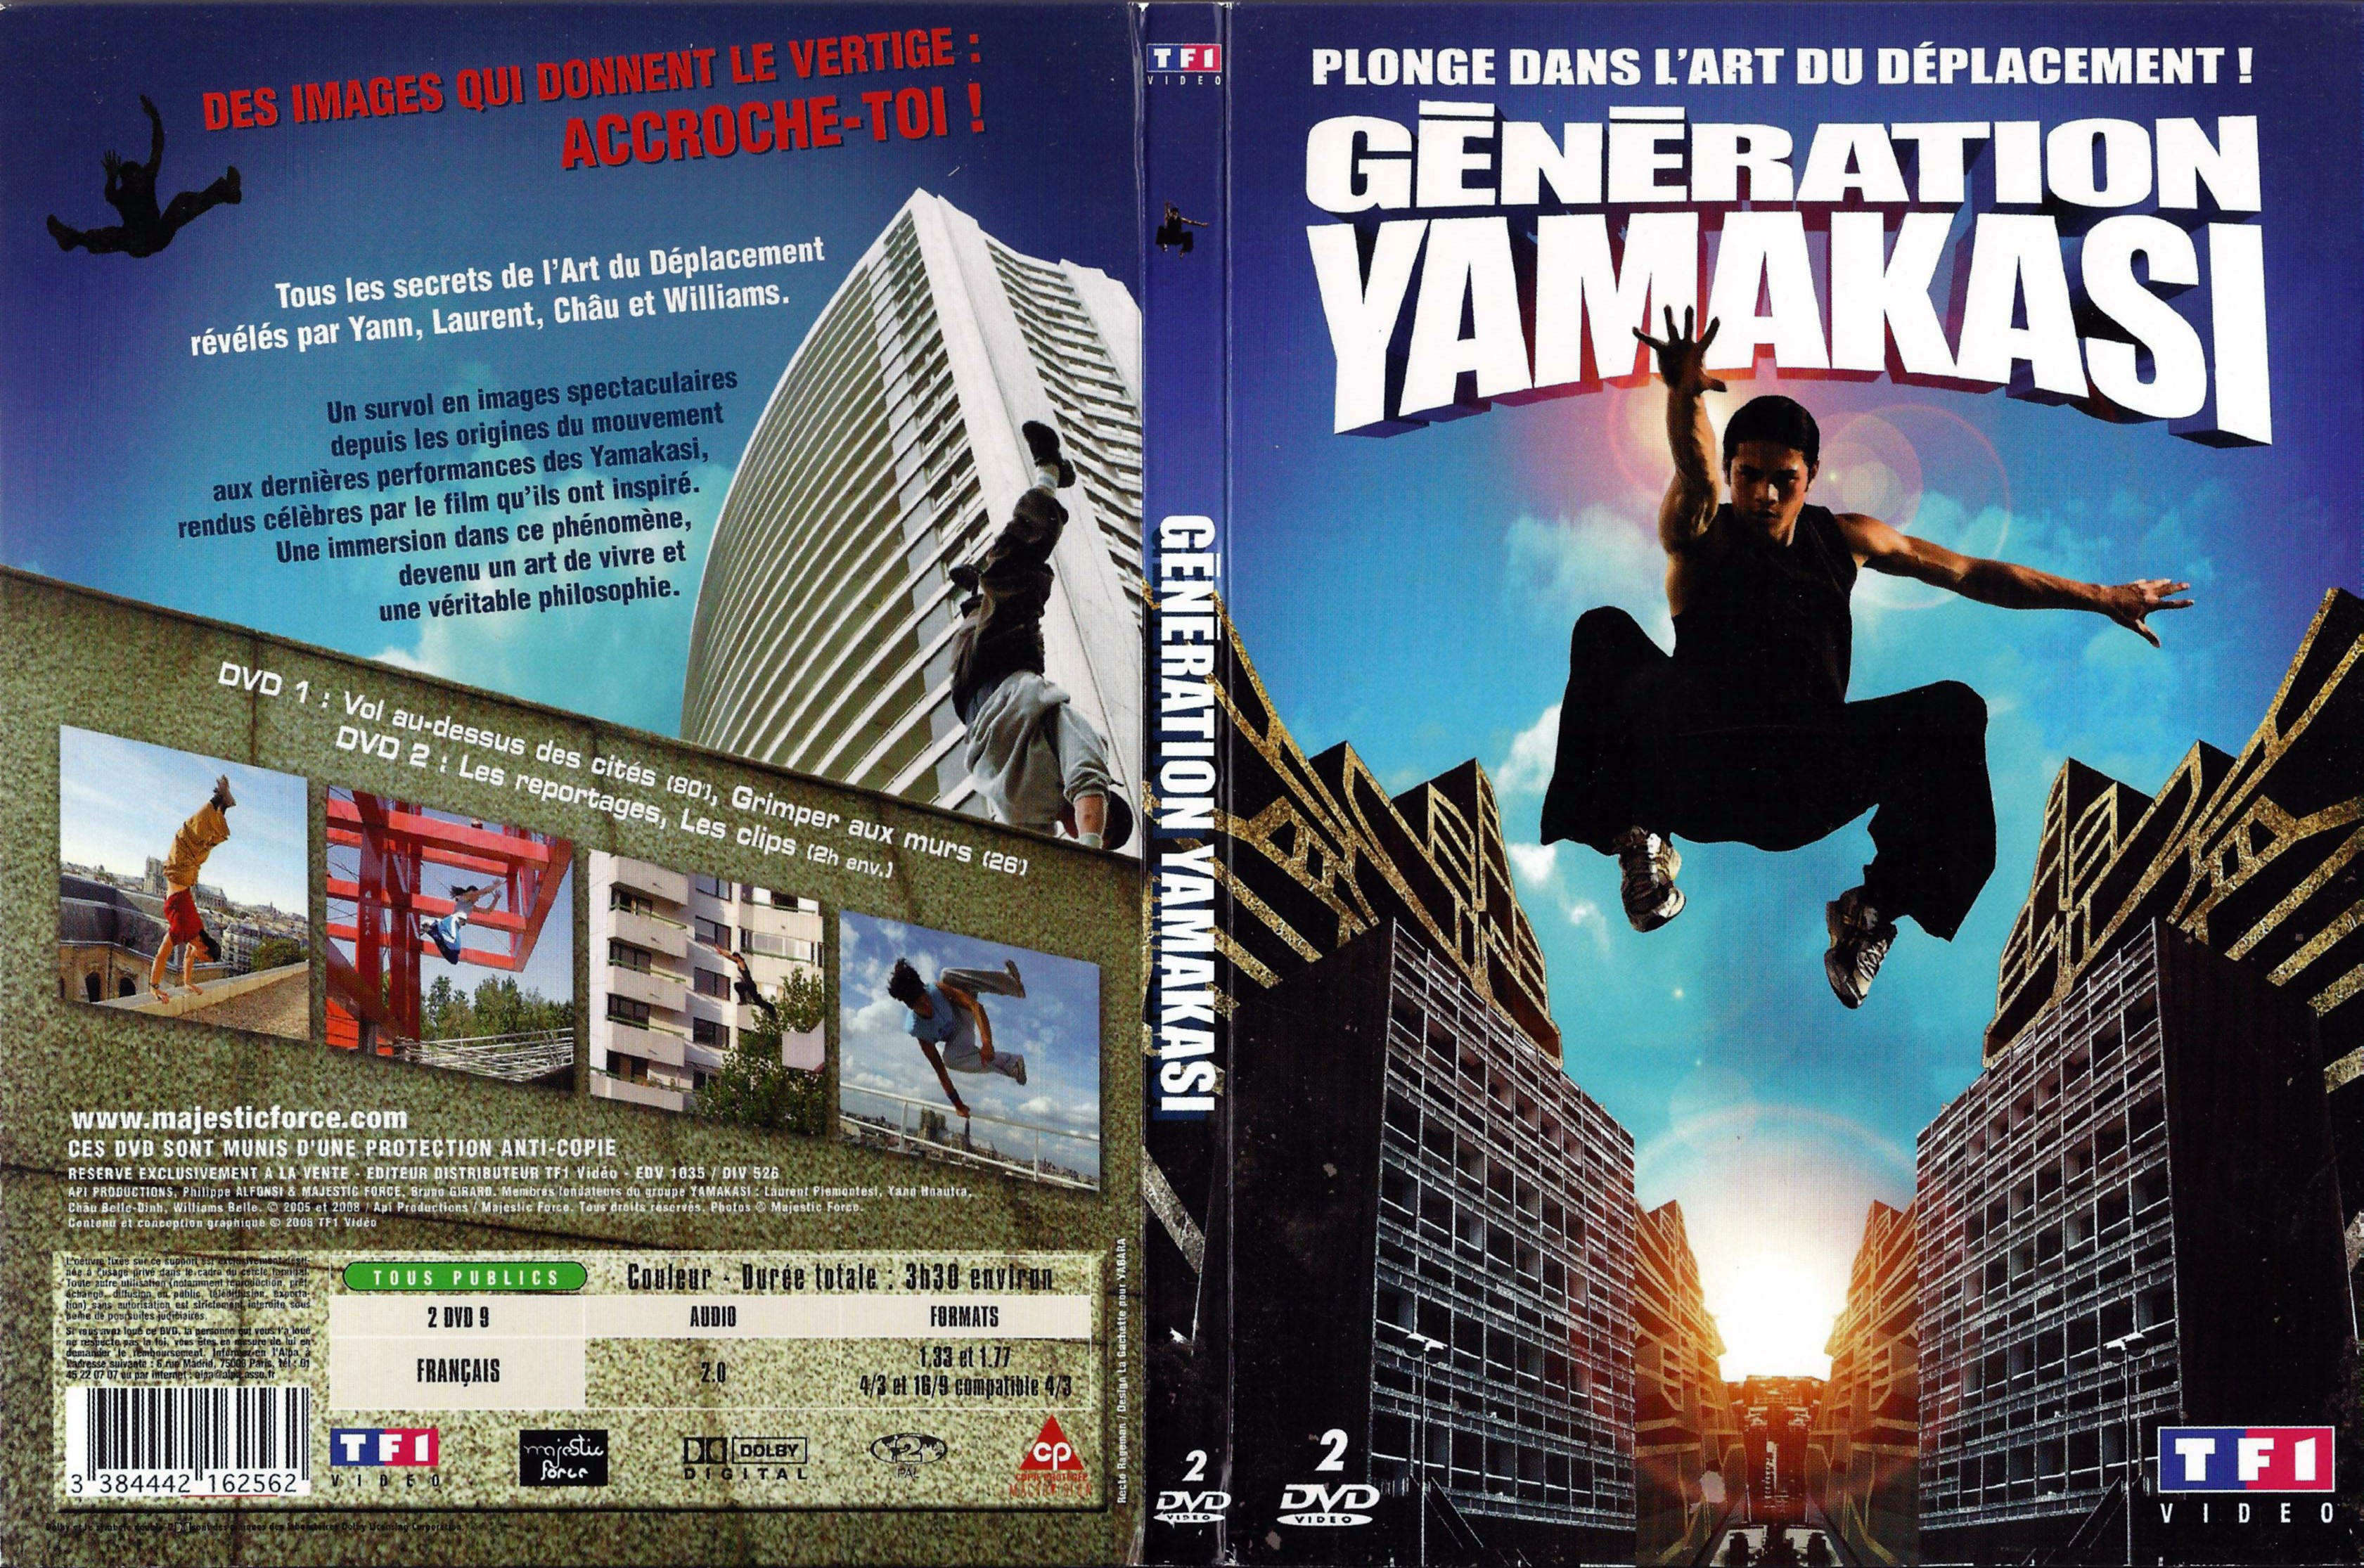 Jaquette DVD Gnration Yamakasi